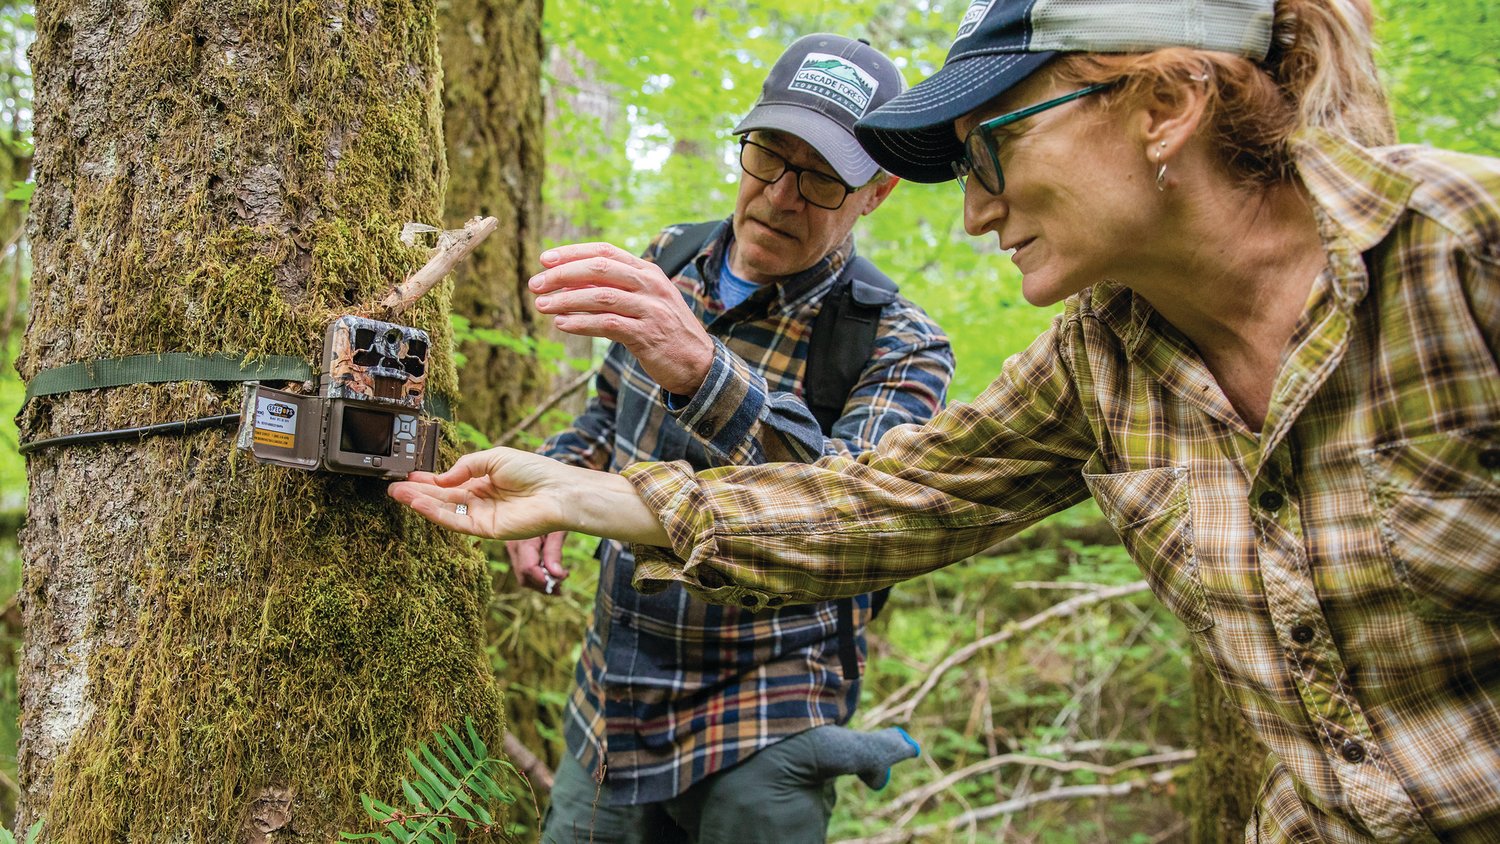 Jeff Green and Kim Freeman work to retrieve a memory card from a game camera in the Gifford Pinchot National Forest Saturday morning in Lewis County.